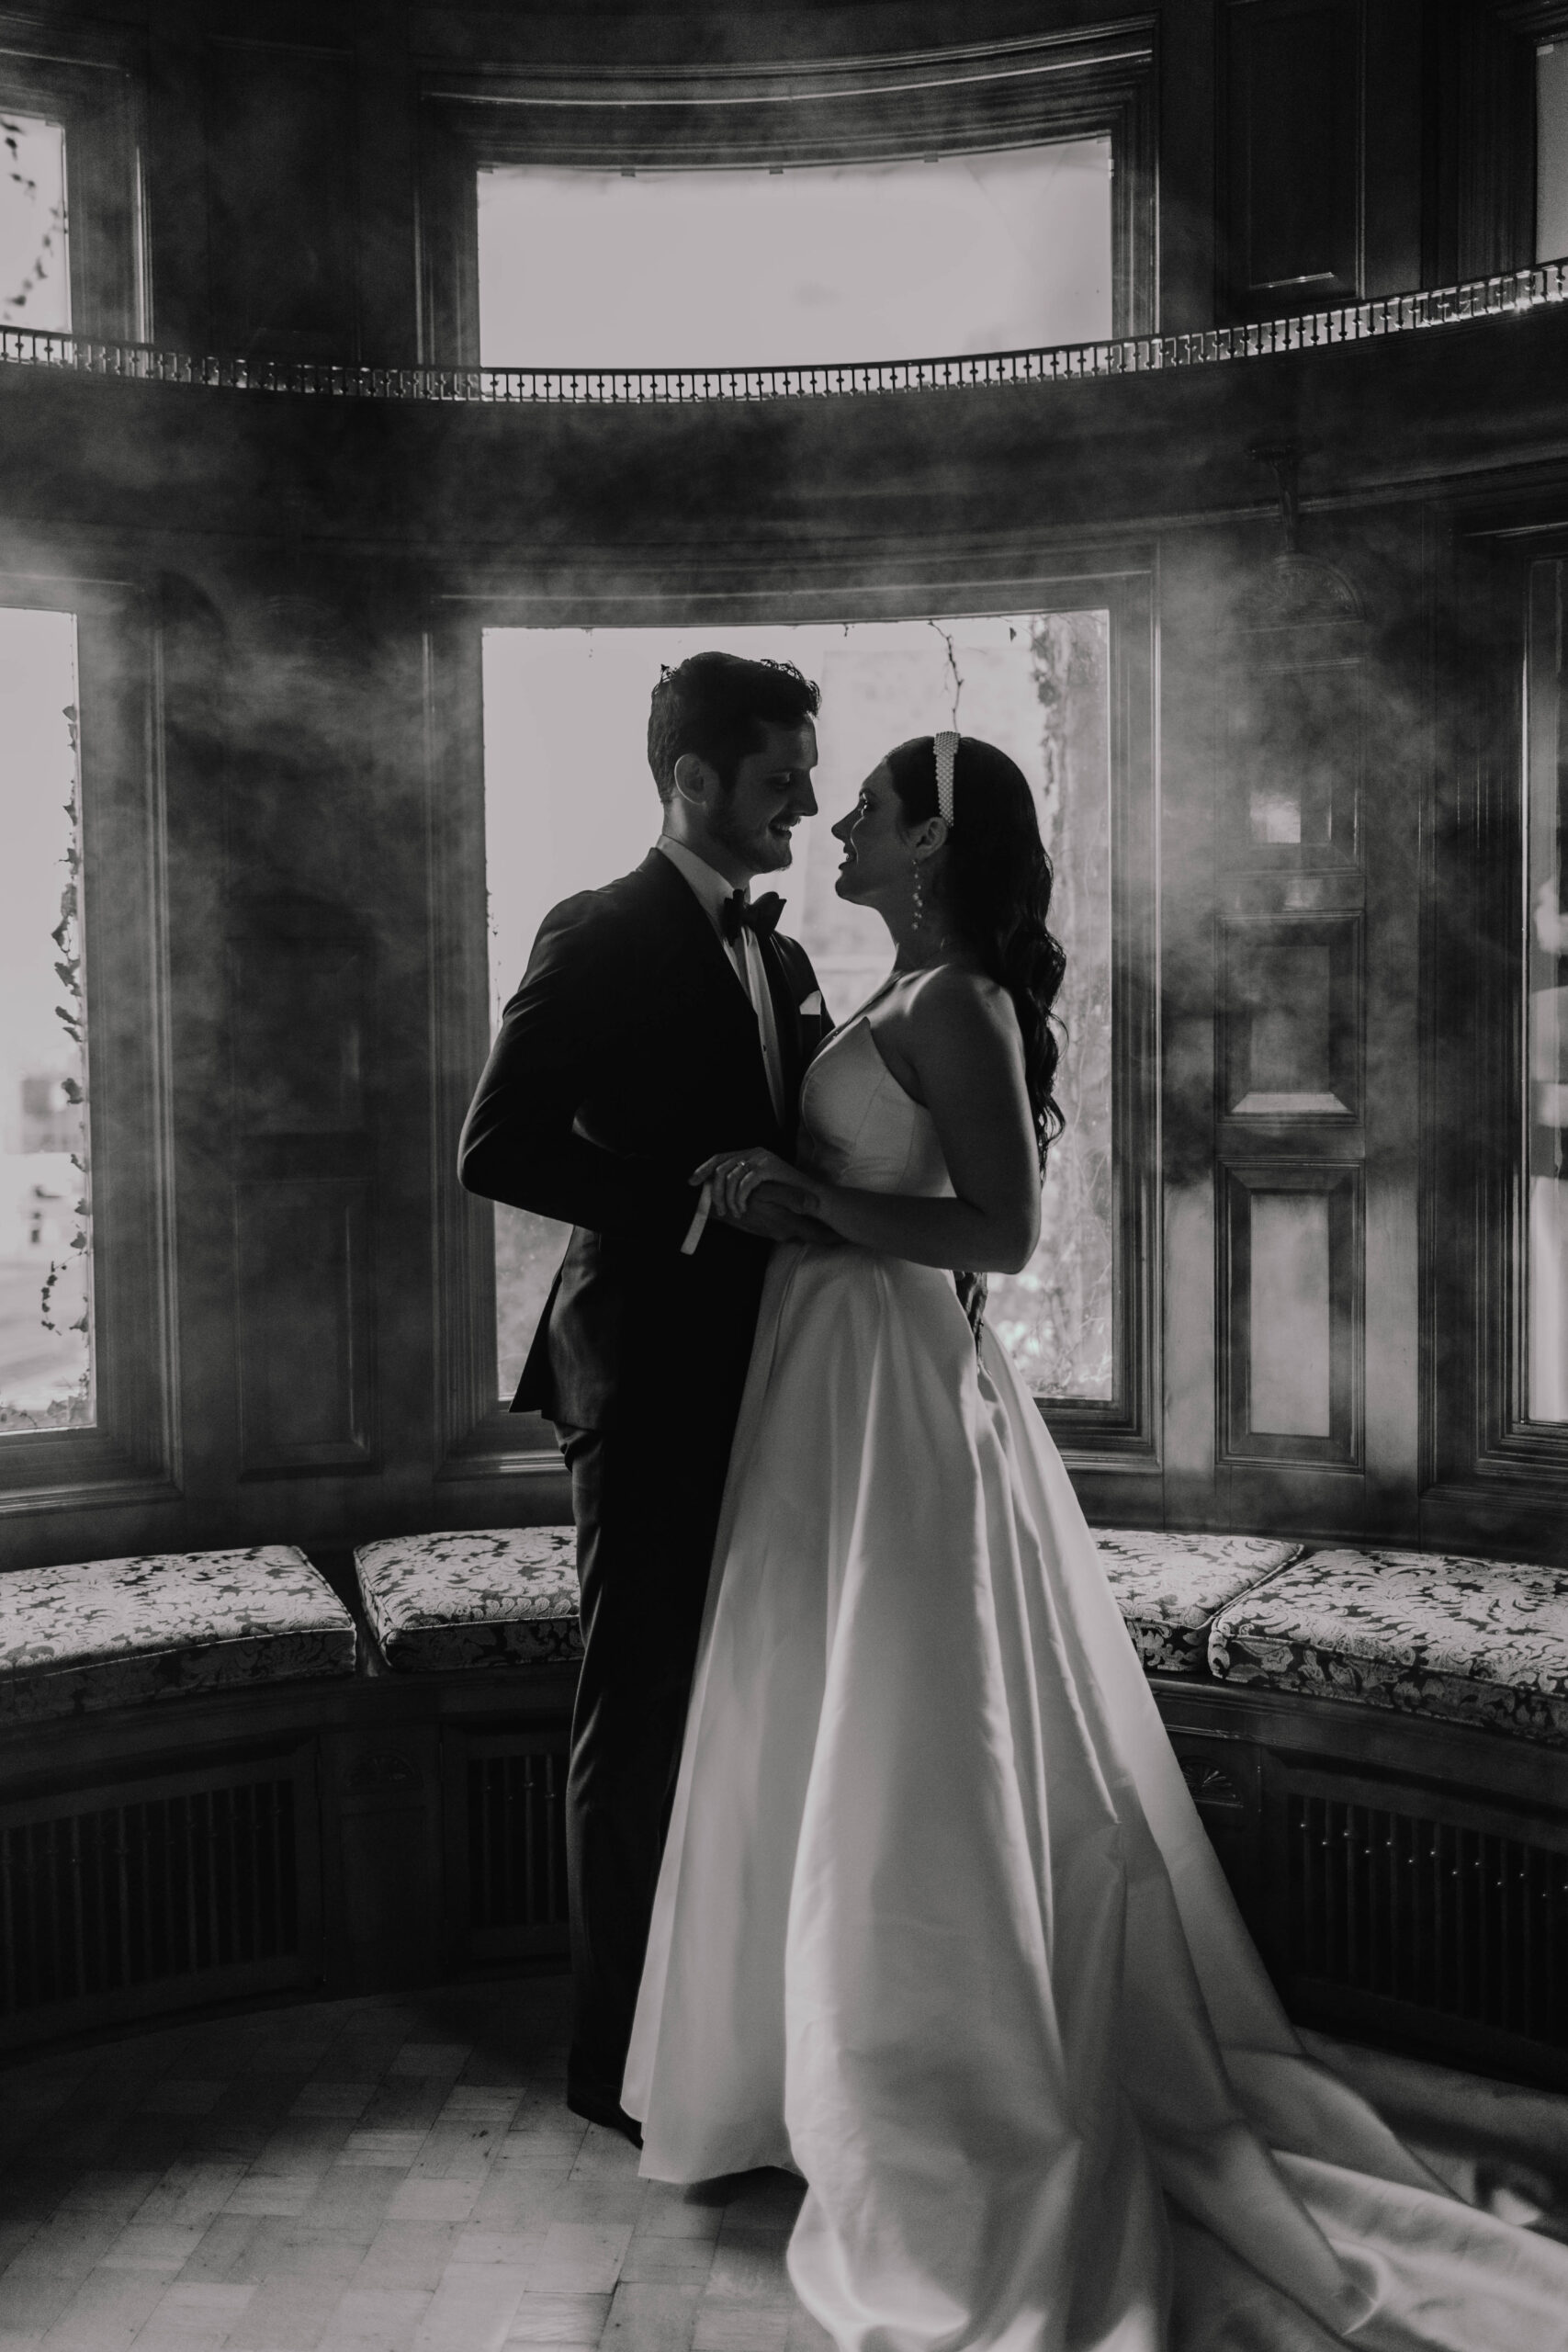 A bride and groom slow dancing in a mansion in front of a big window